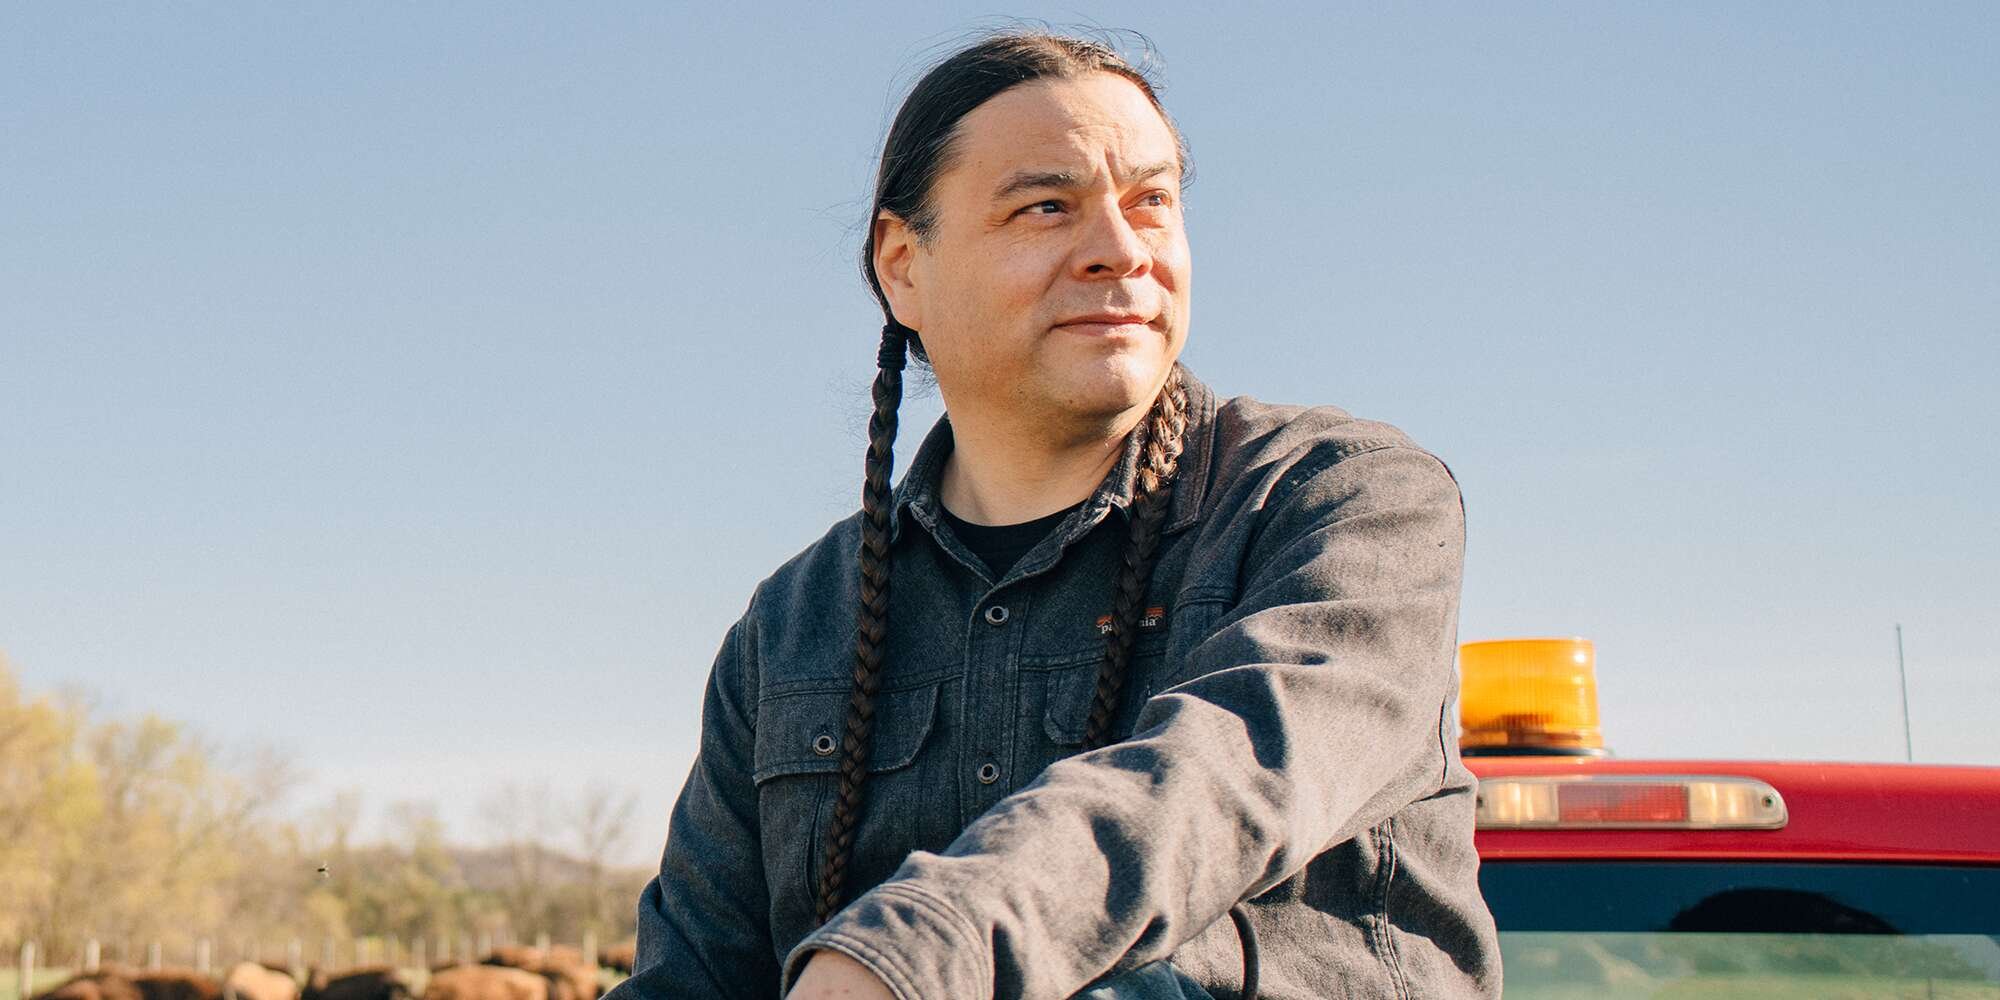 Meet Sean Sherman—the Sioux Chef Making Healthy Indigenous Food Accessible & Restoring Community Traditions